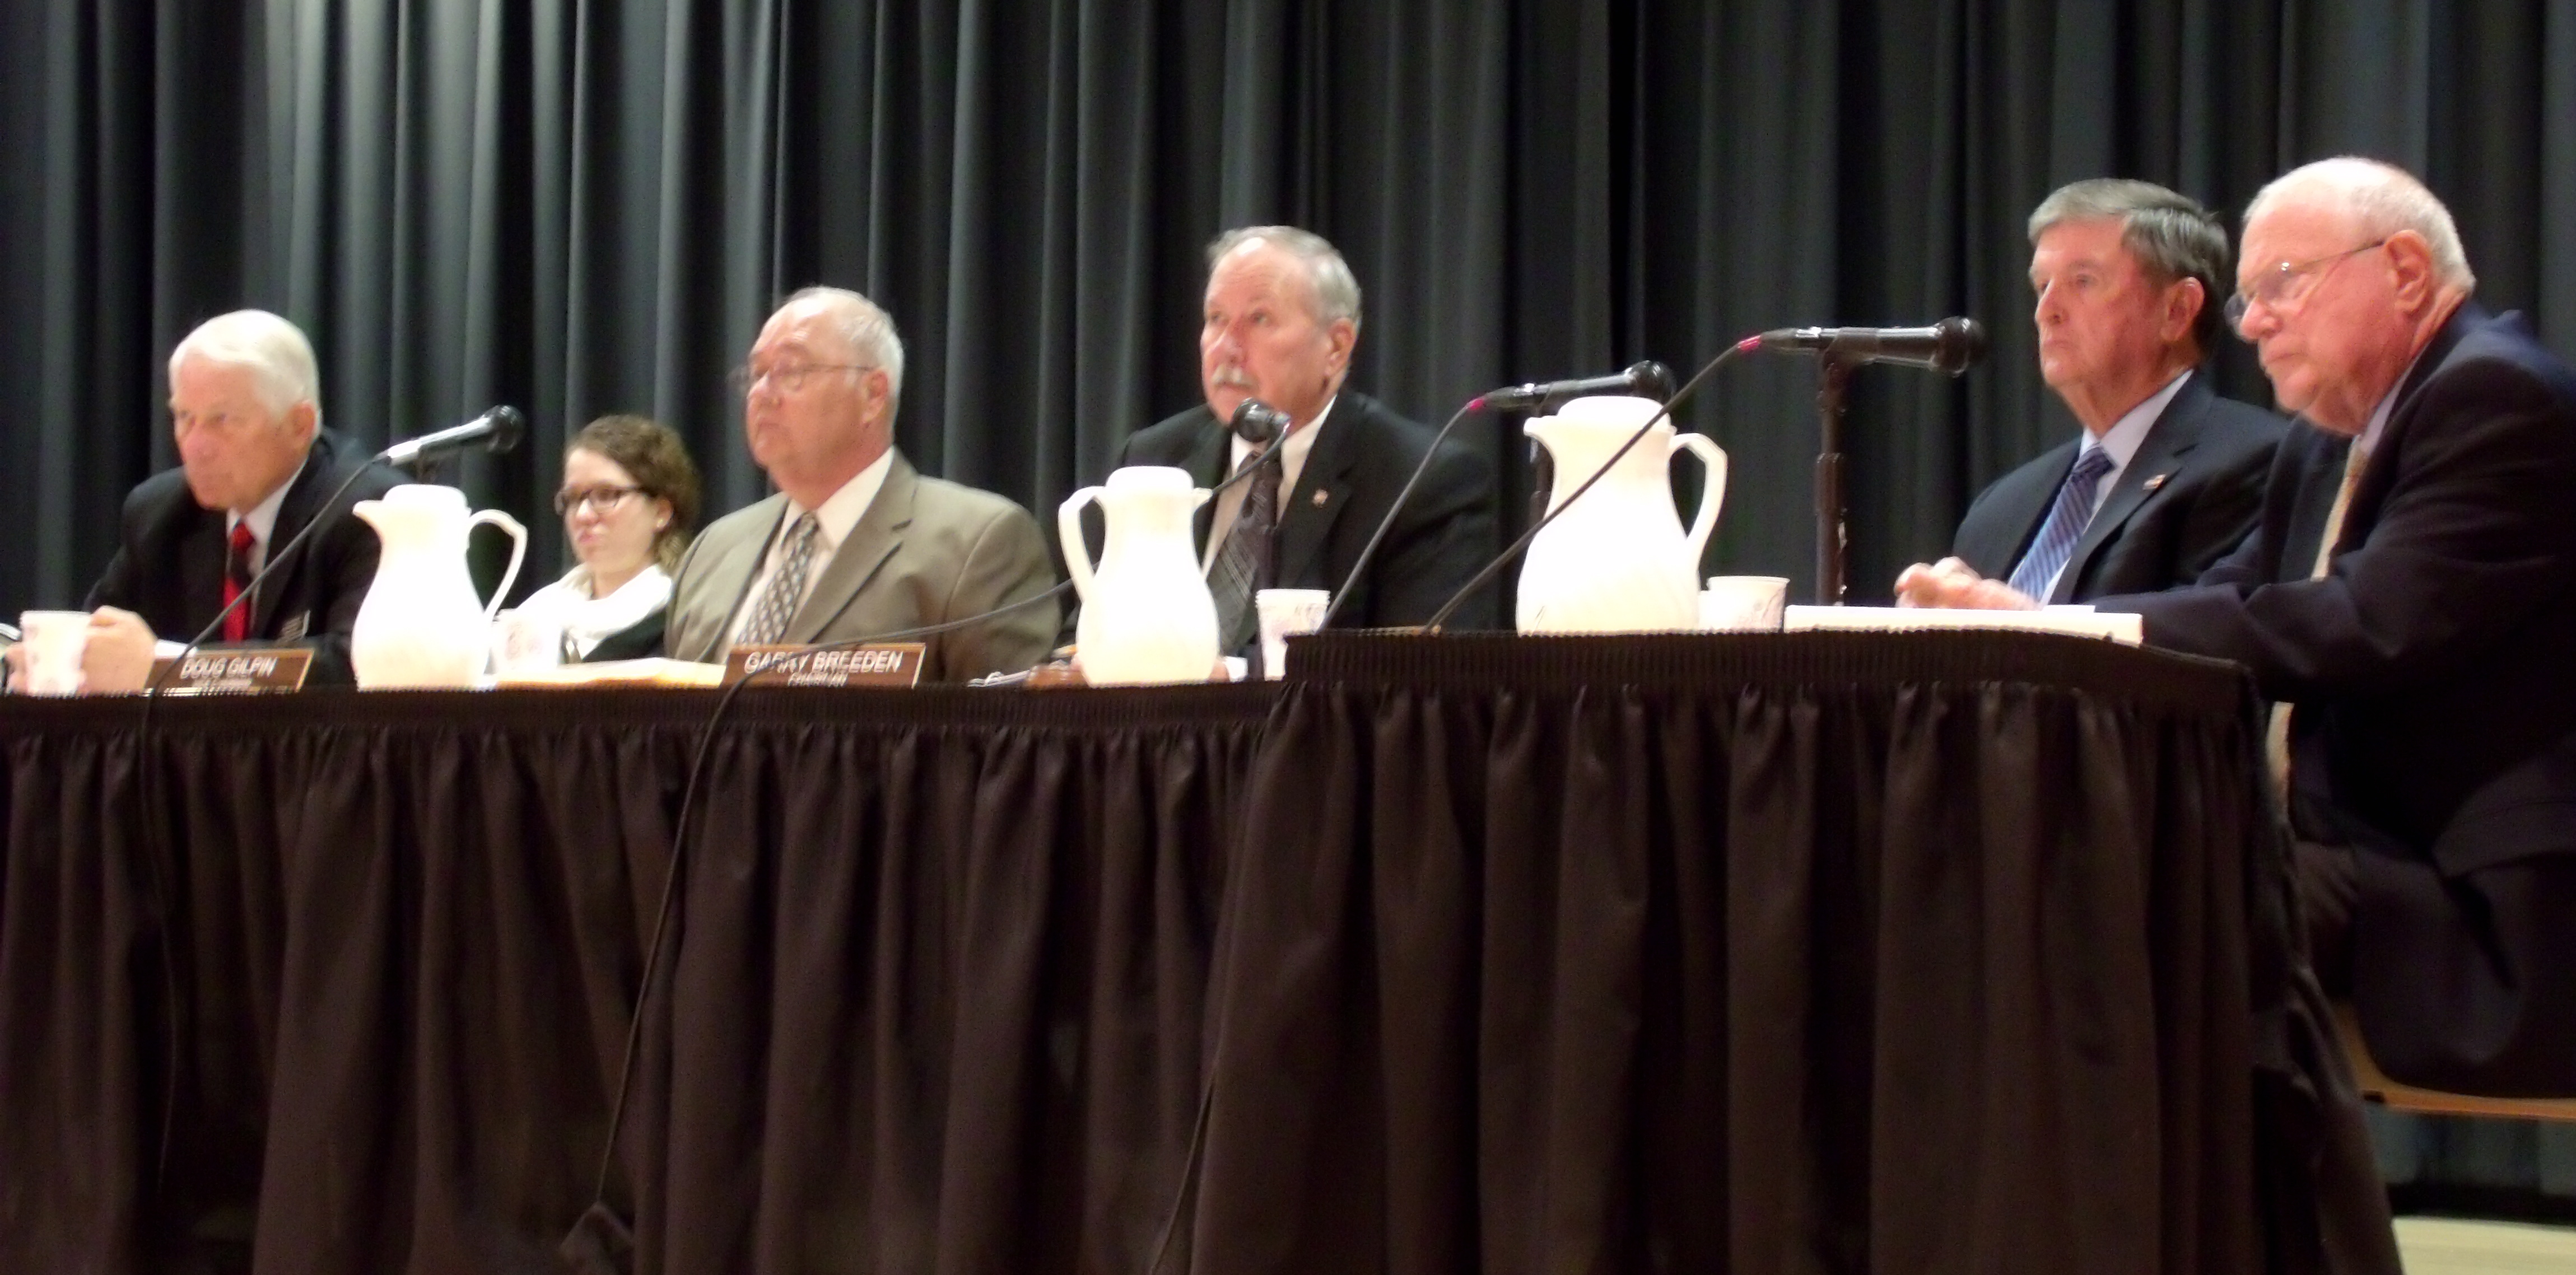 Sumter County Commissioners, from left, Don Hahnfeldt, Doug Gilpin, Garry Breeden, Al Butler and Don Burgess.